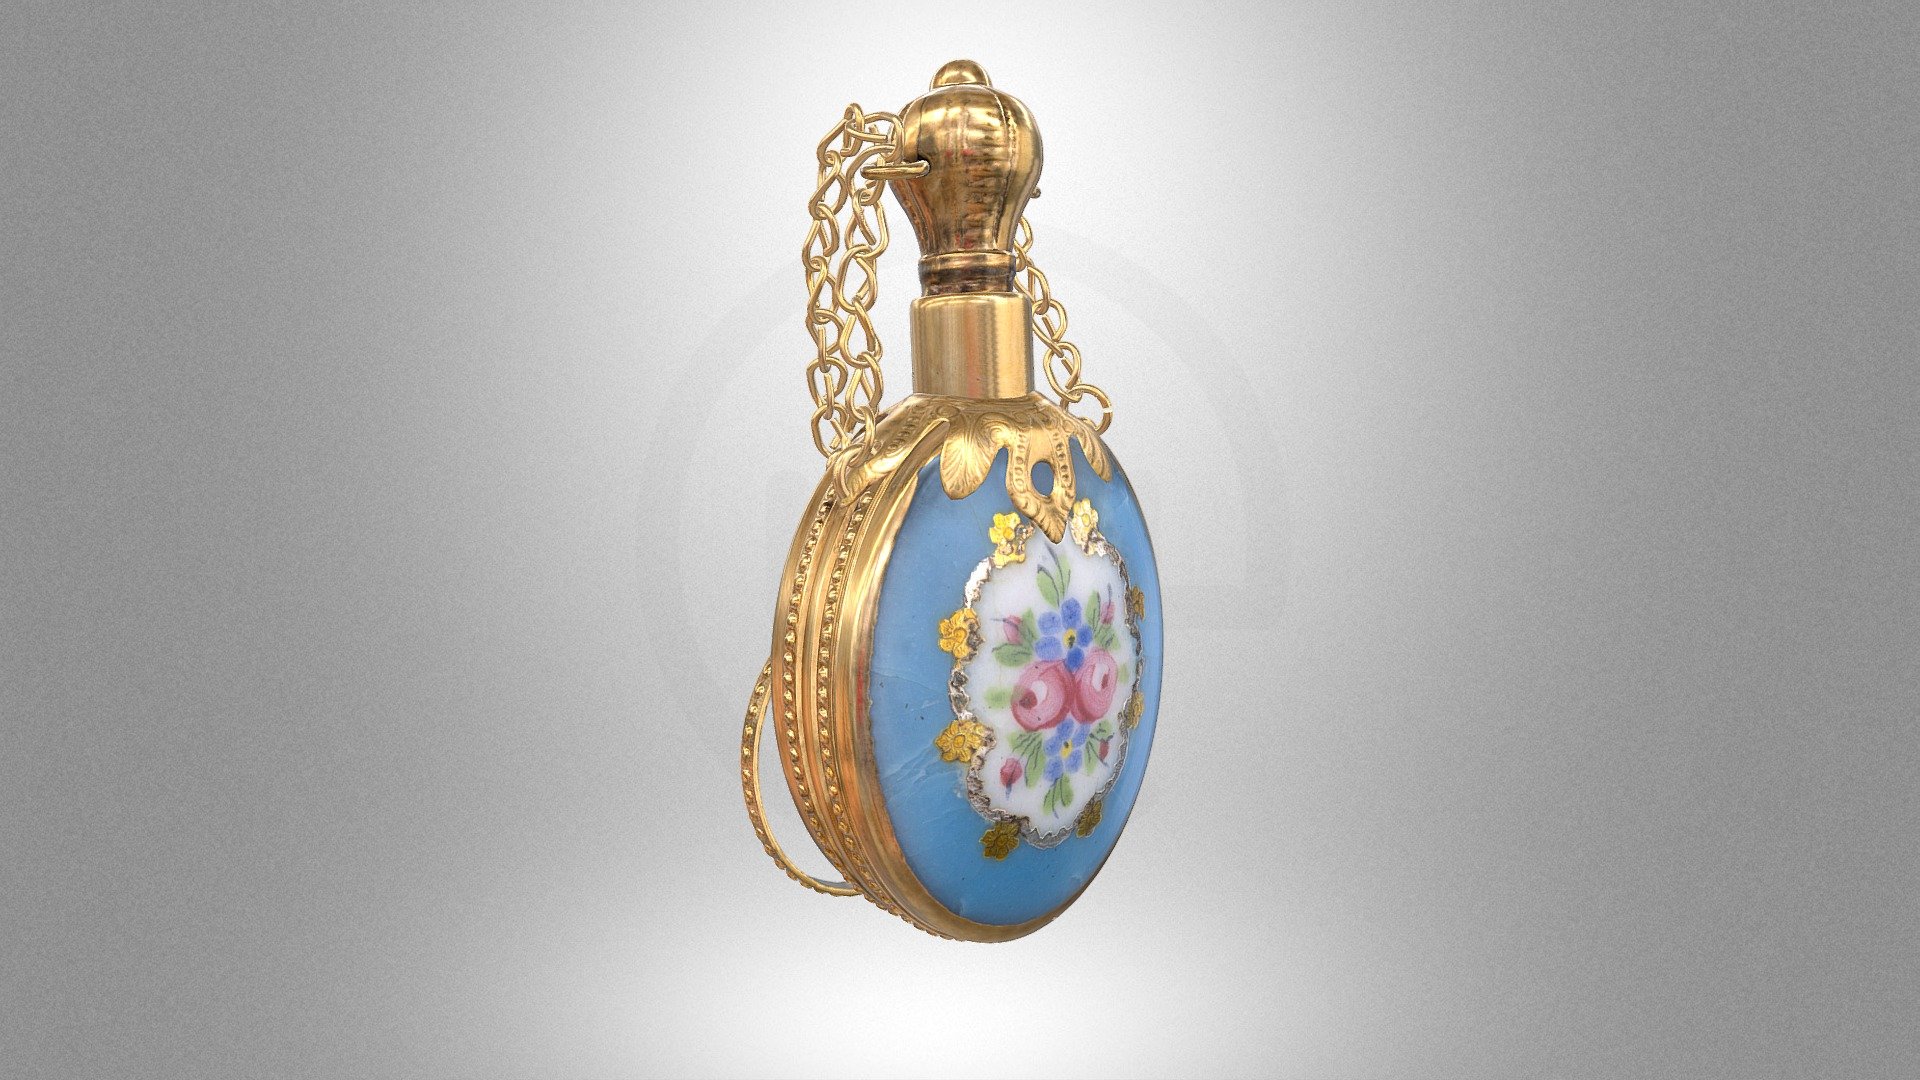 Perfume bottle on a chain